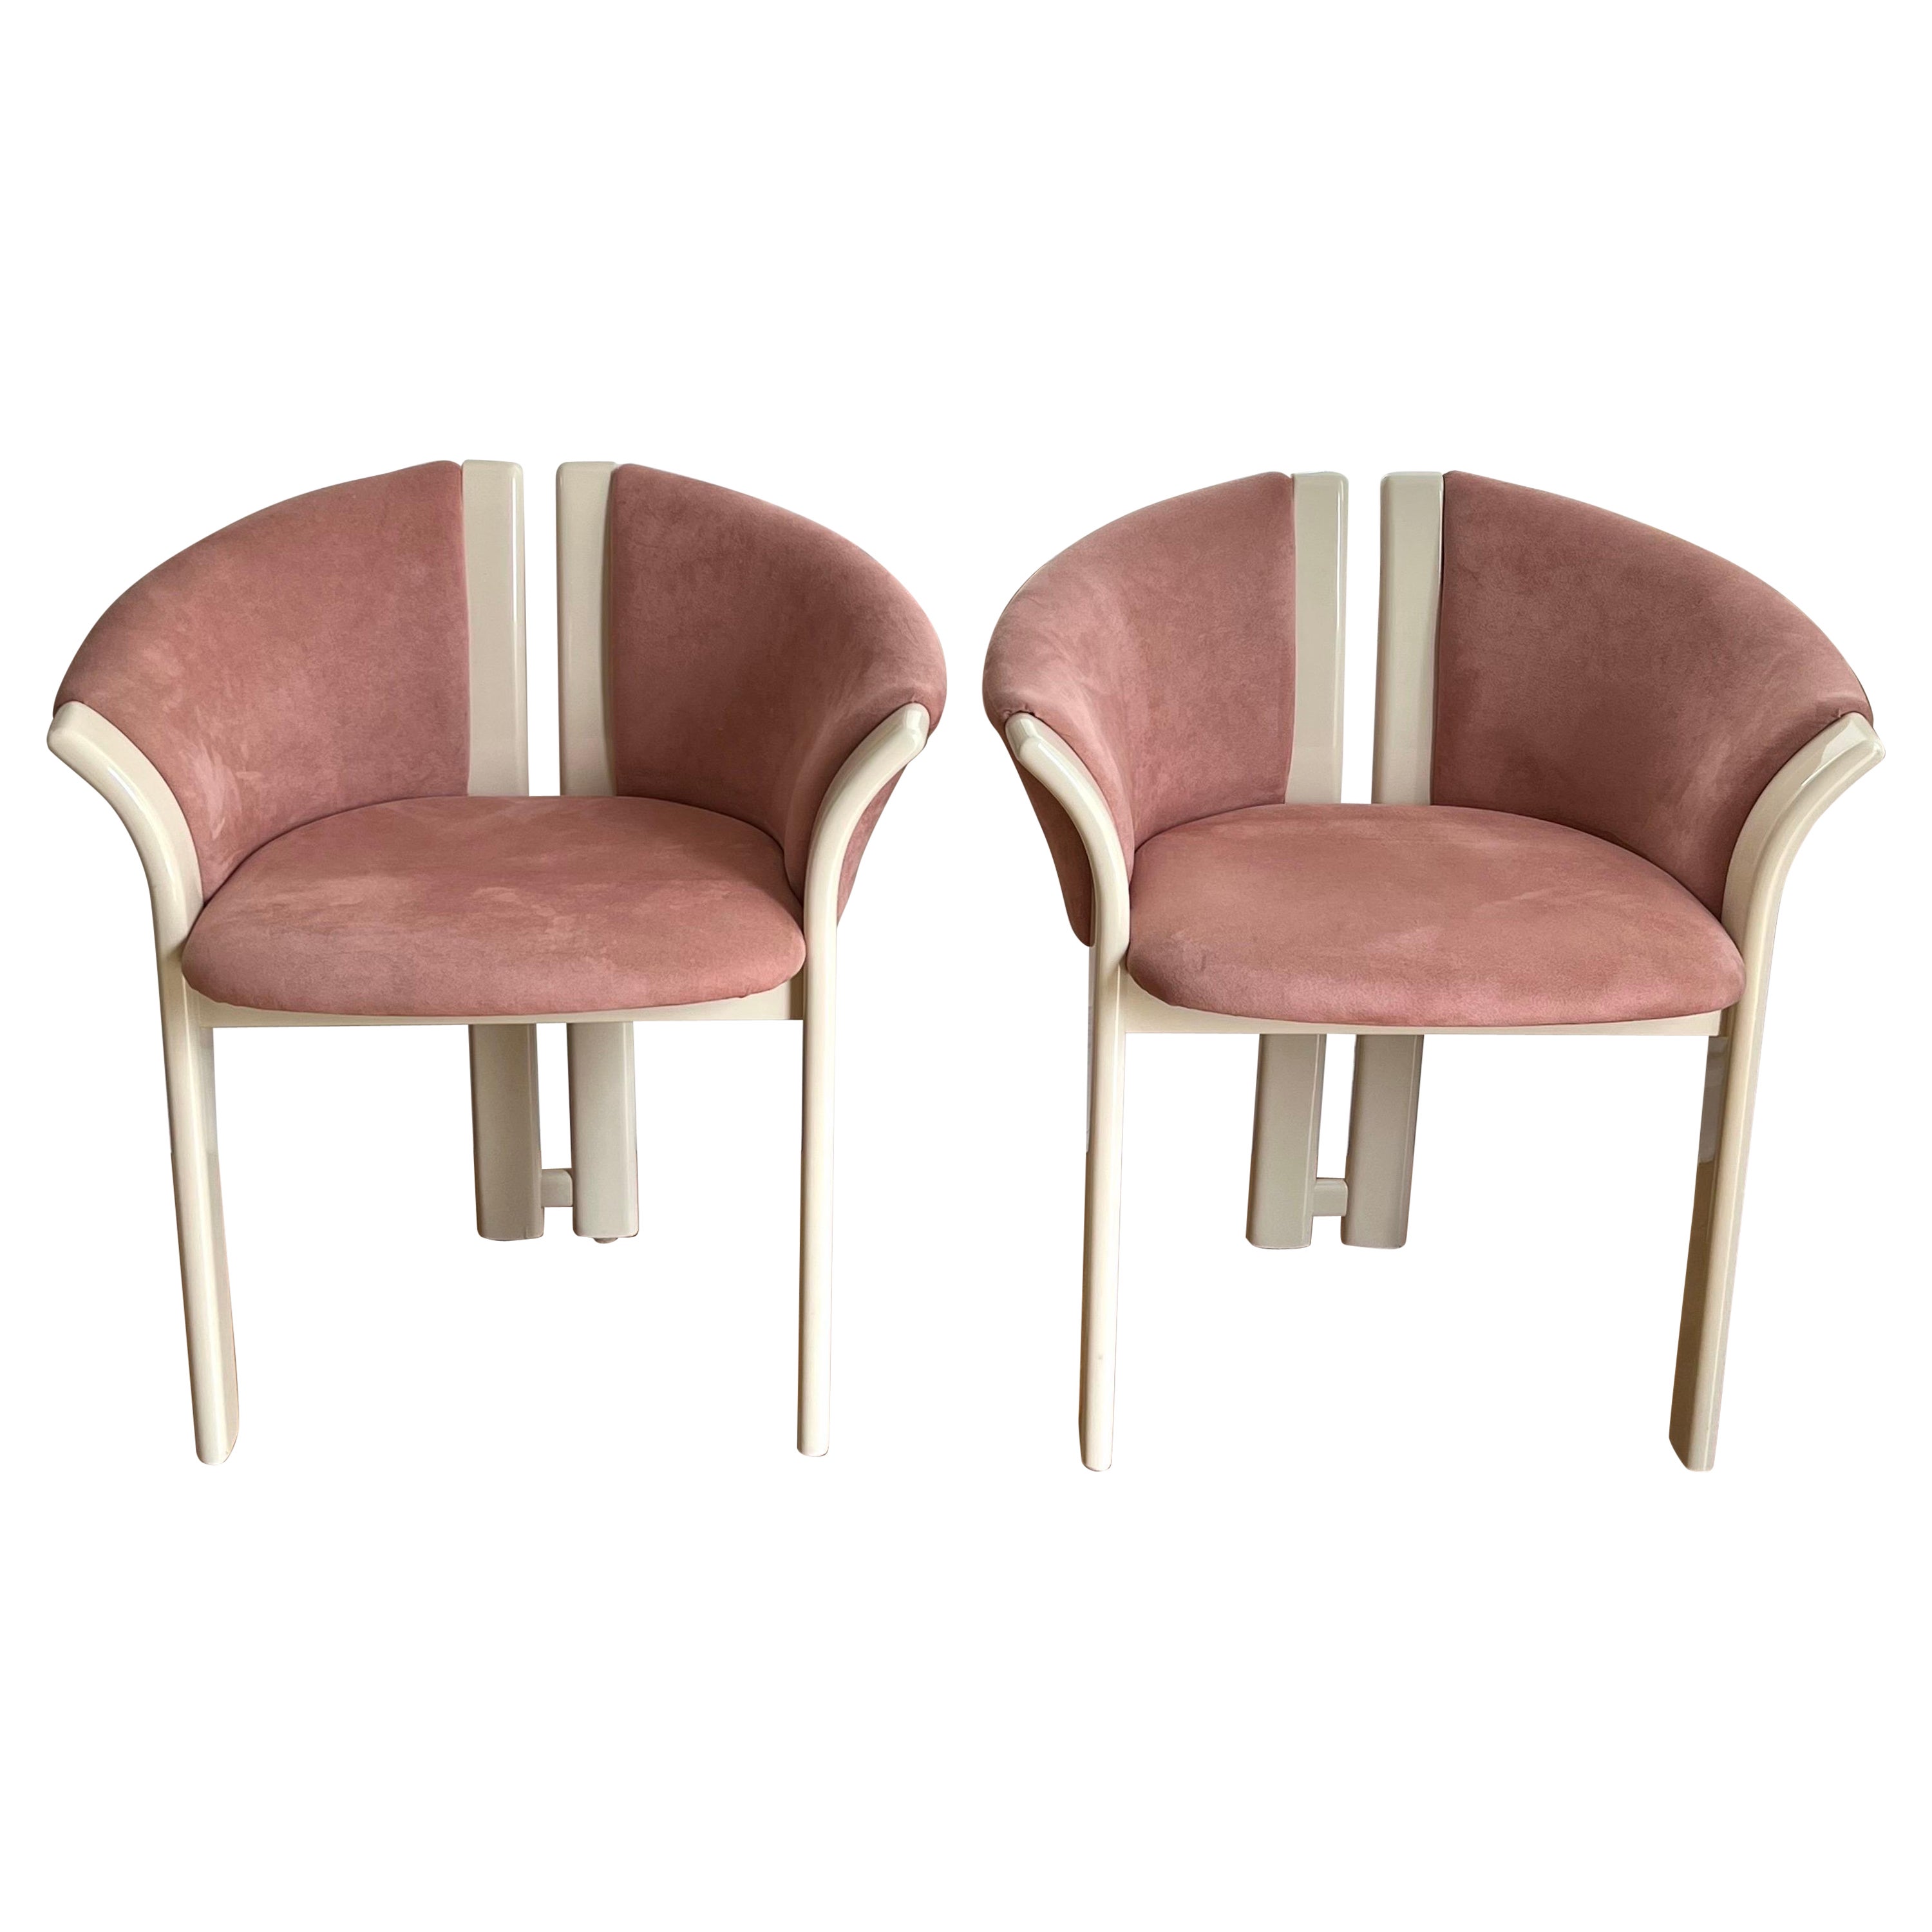 1980 Lacquer Pink Velvet Sculpture Chairs, in the style of Karl Springer